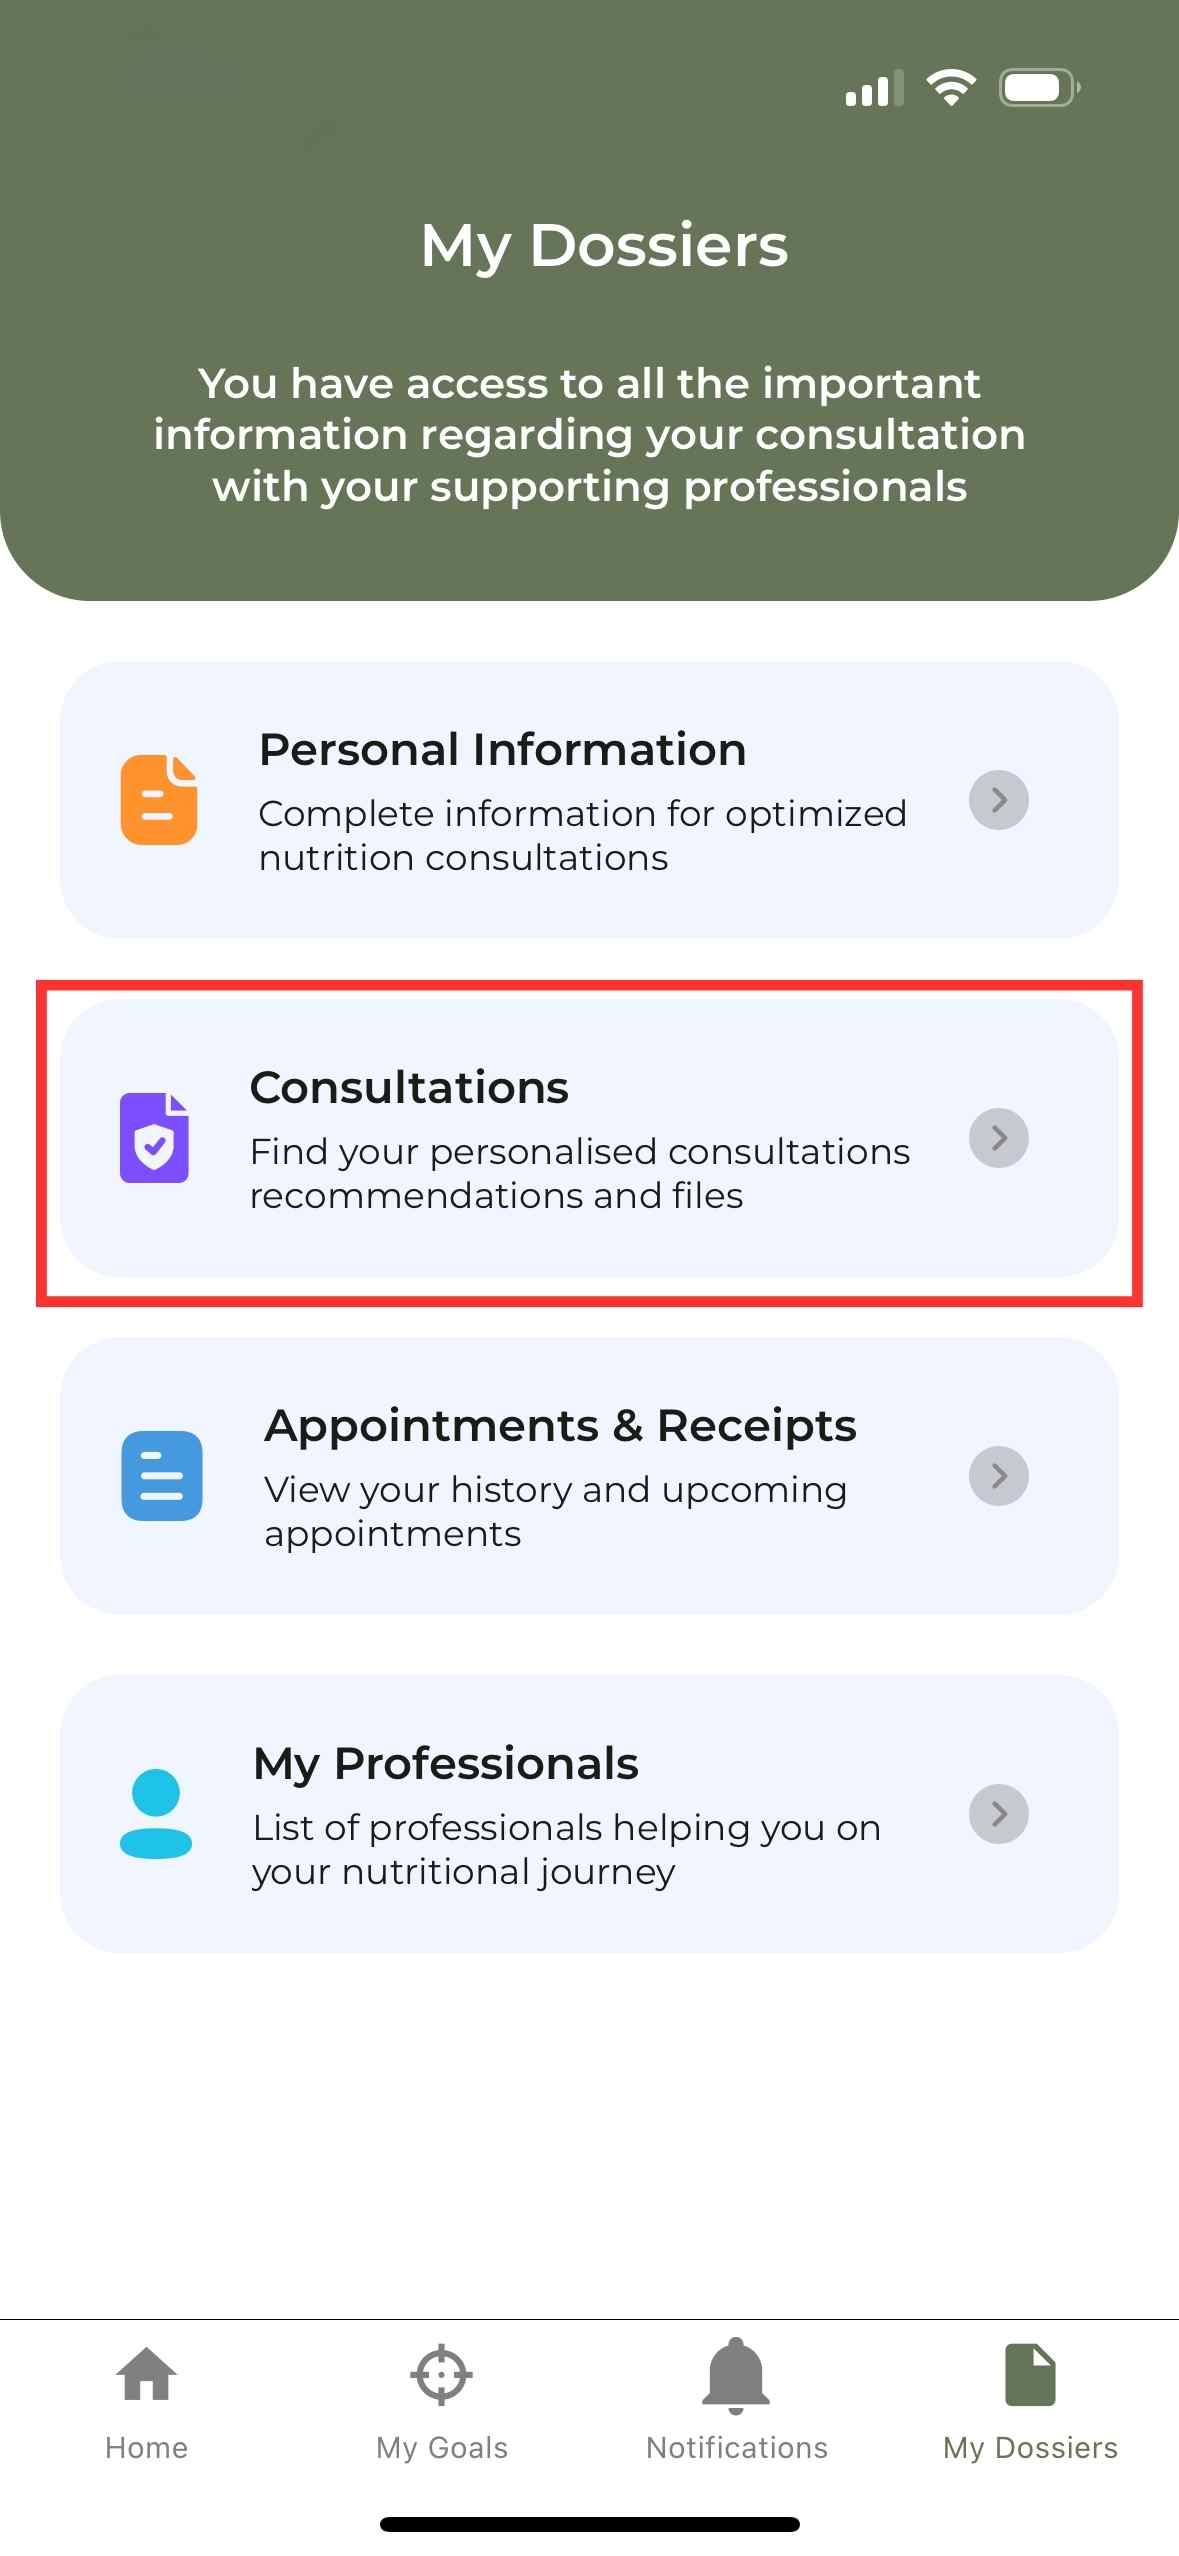 Where can I find my personalized recommendations and tools seen in consultation?